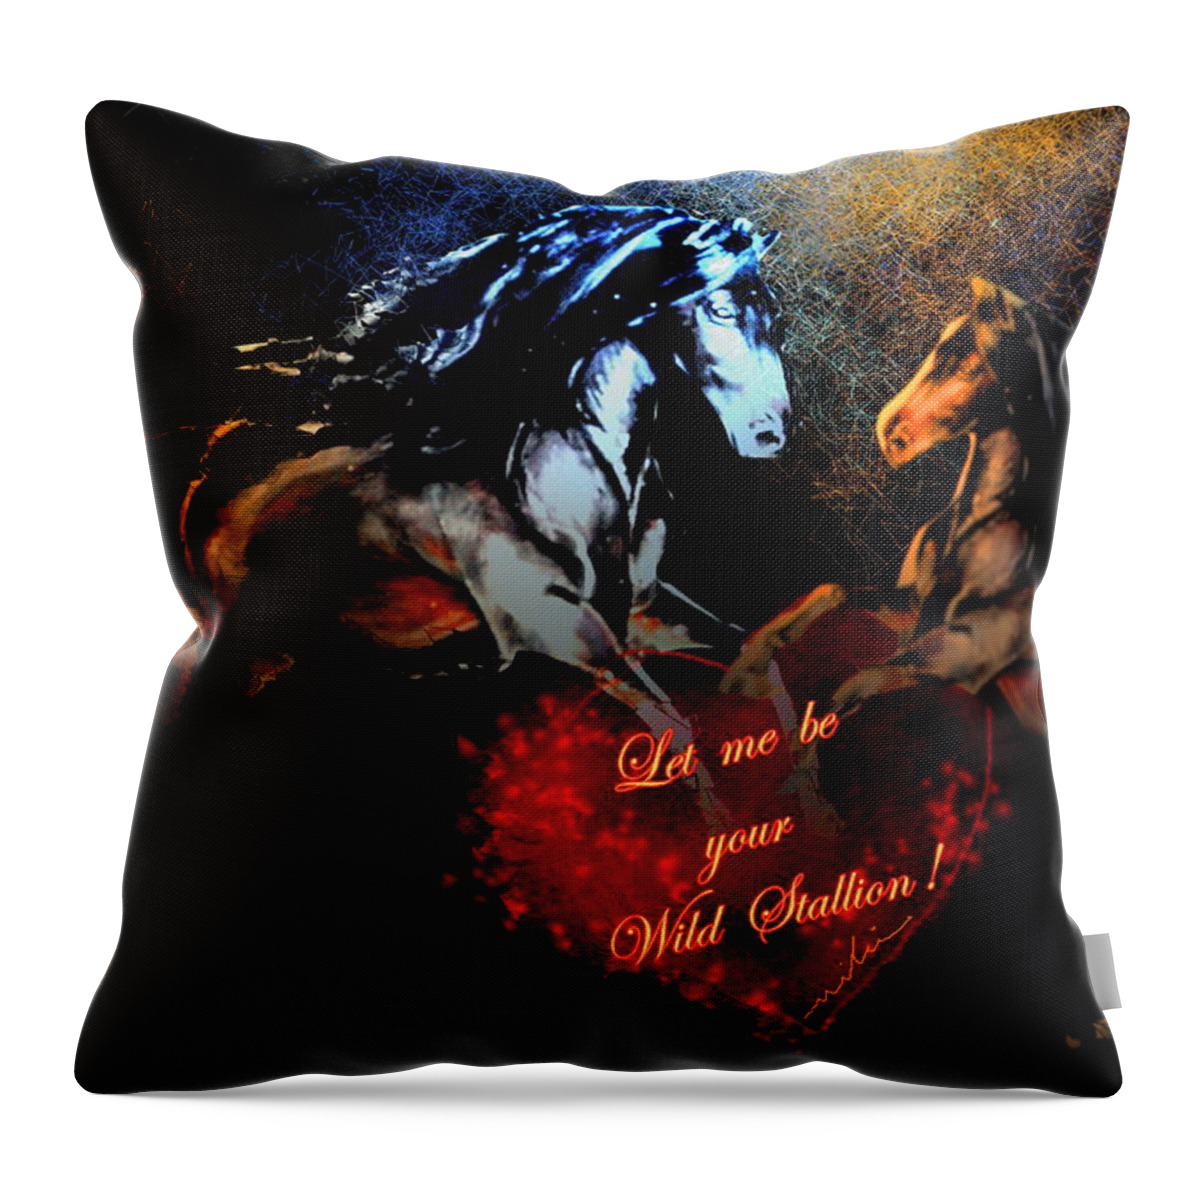 Love Throw Pillow featuring the painting Let Me Be Your wild Stallion by Miki De Goodaboom